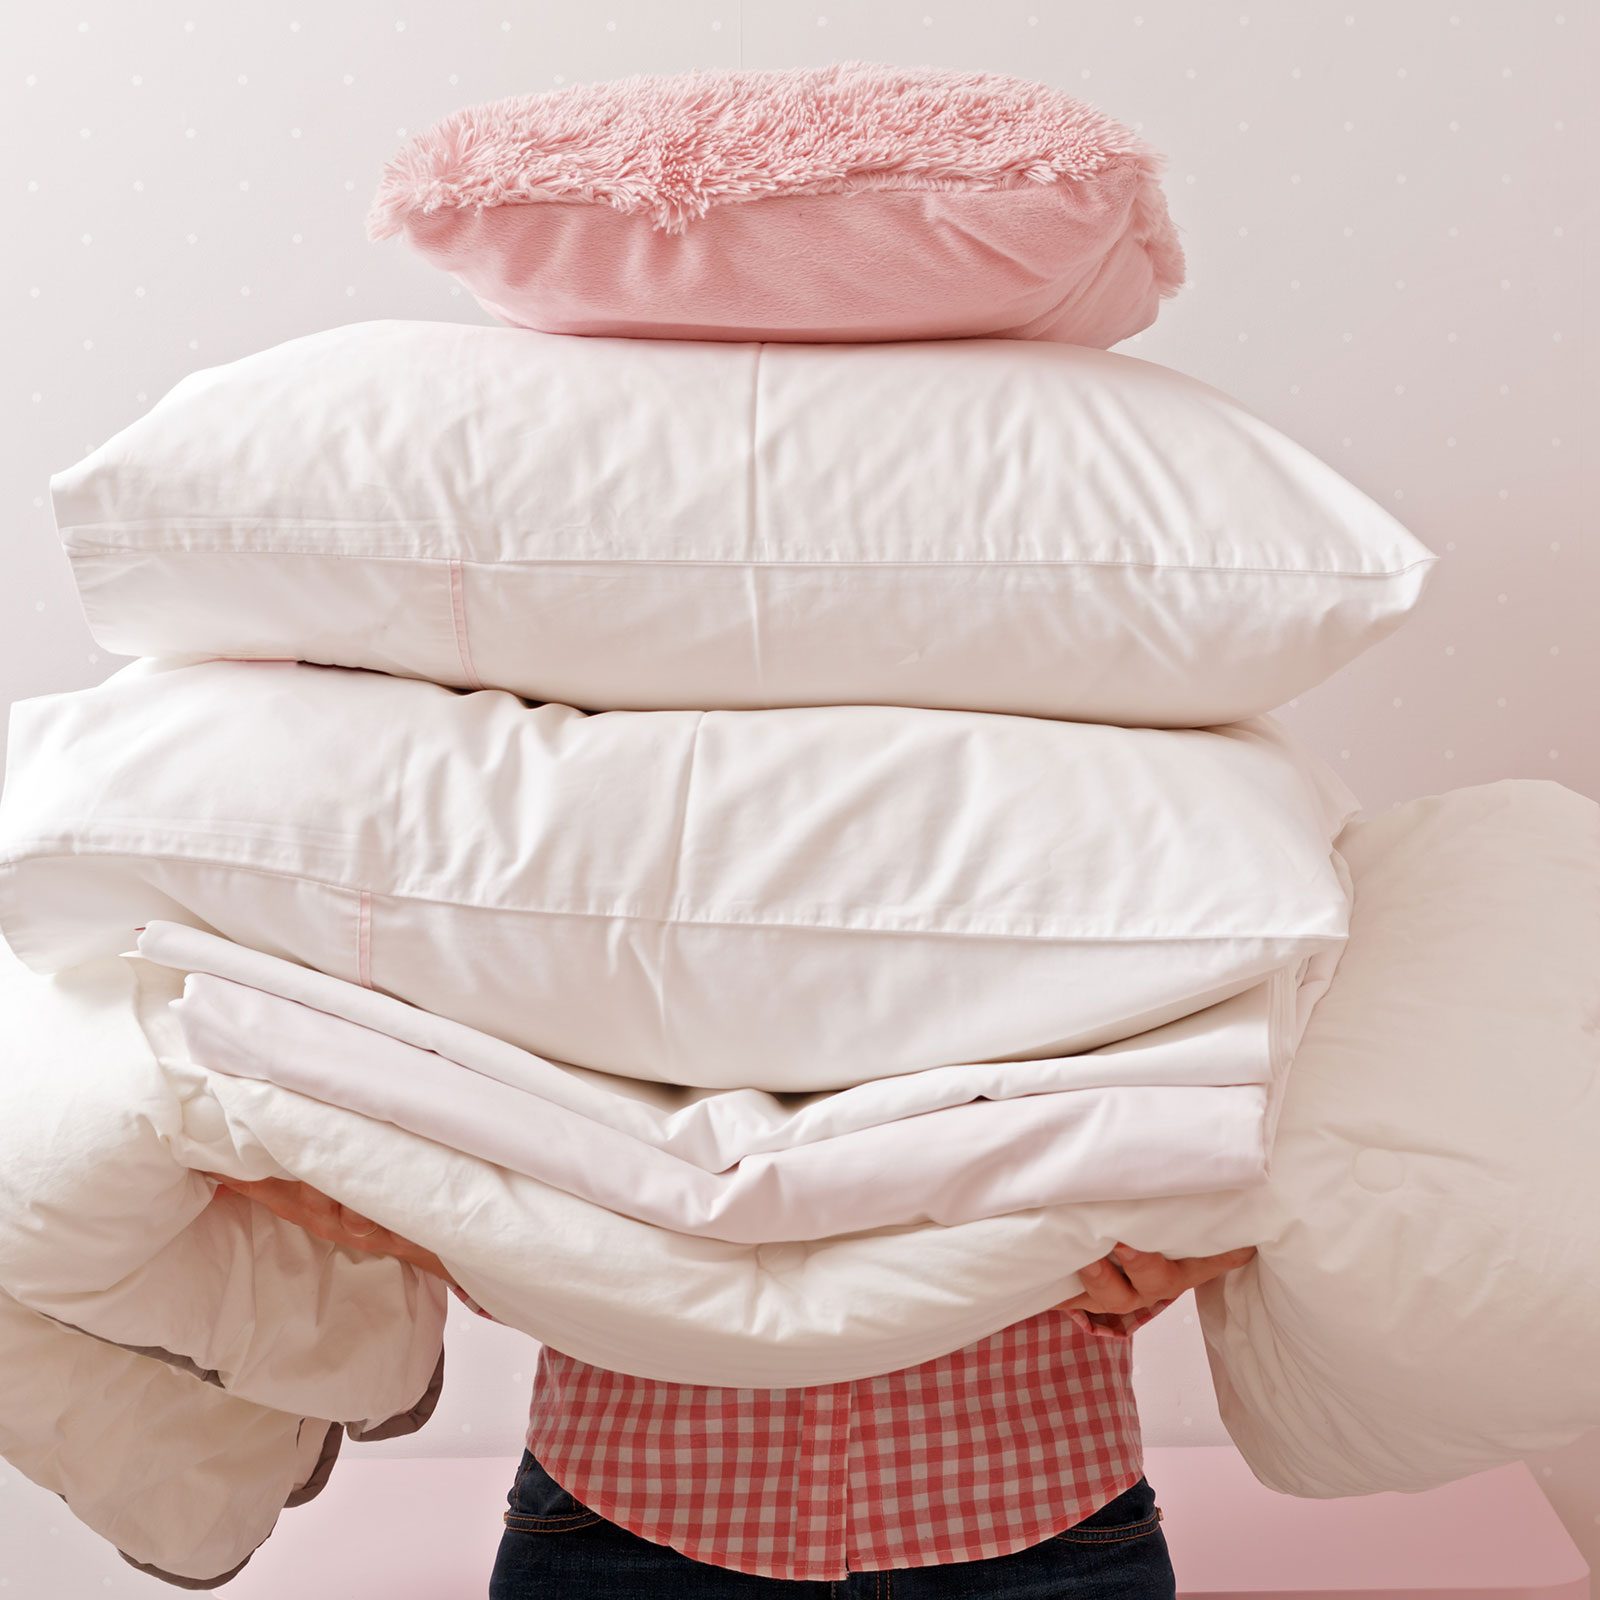 Woman Holding A Pile Of Bedding For Sleeping